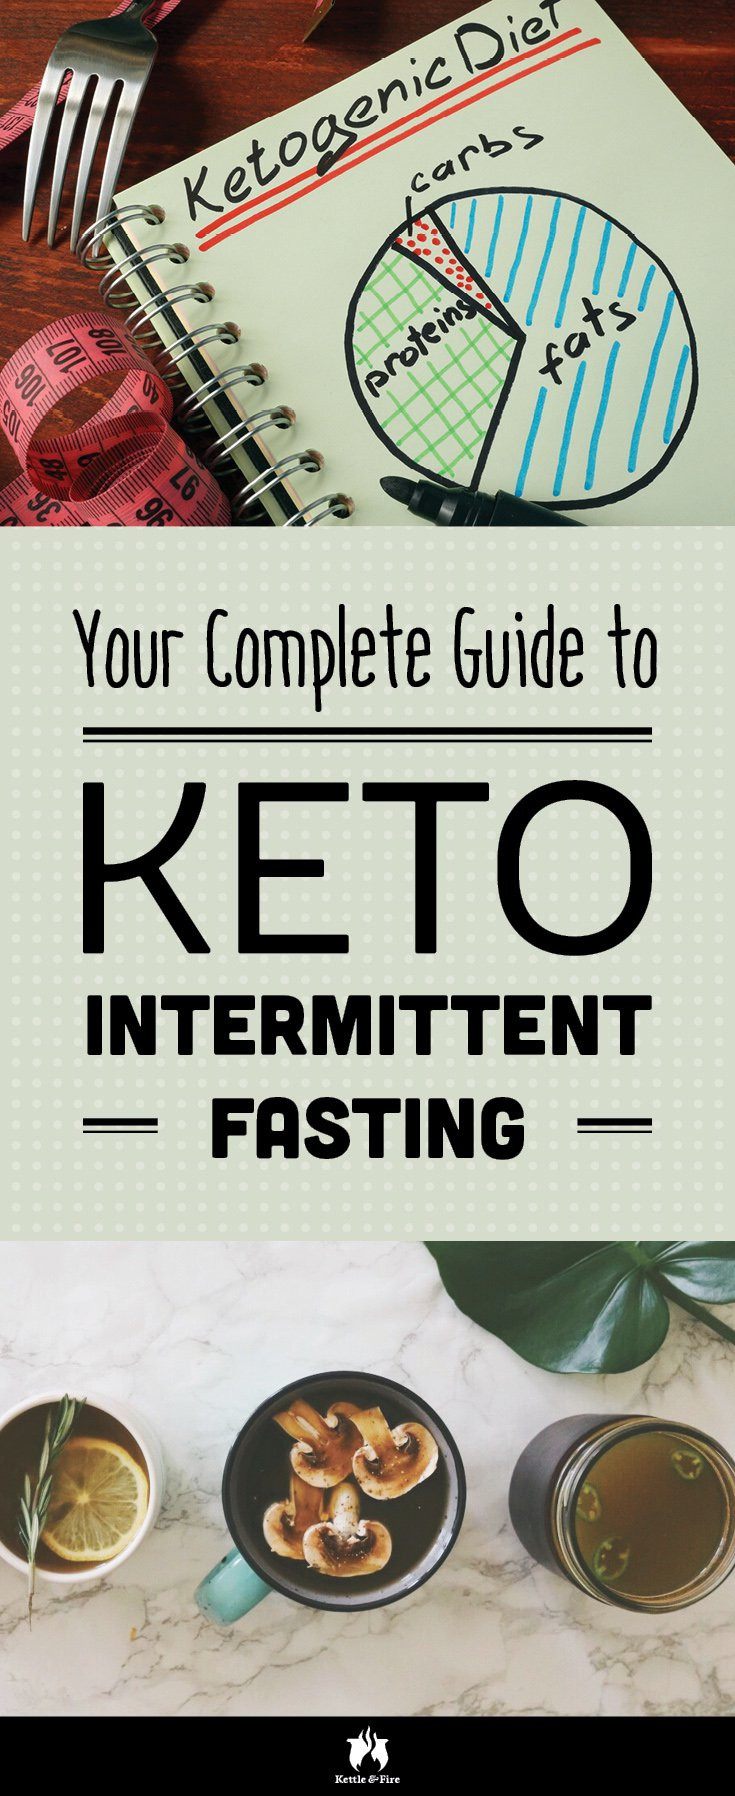 Keto Diet And Intermittent Fasting
 Your plete Guide to Keto Intermittent Fasting